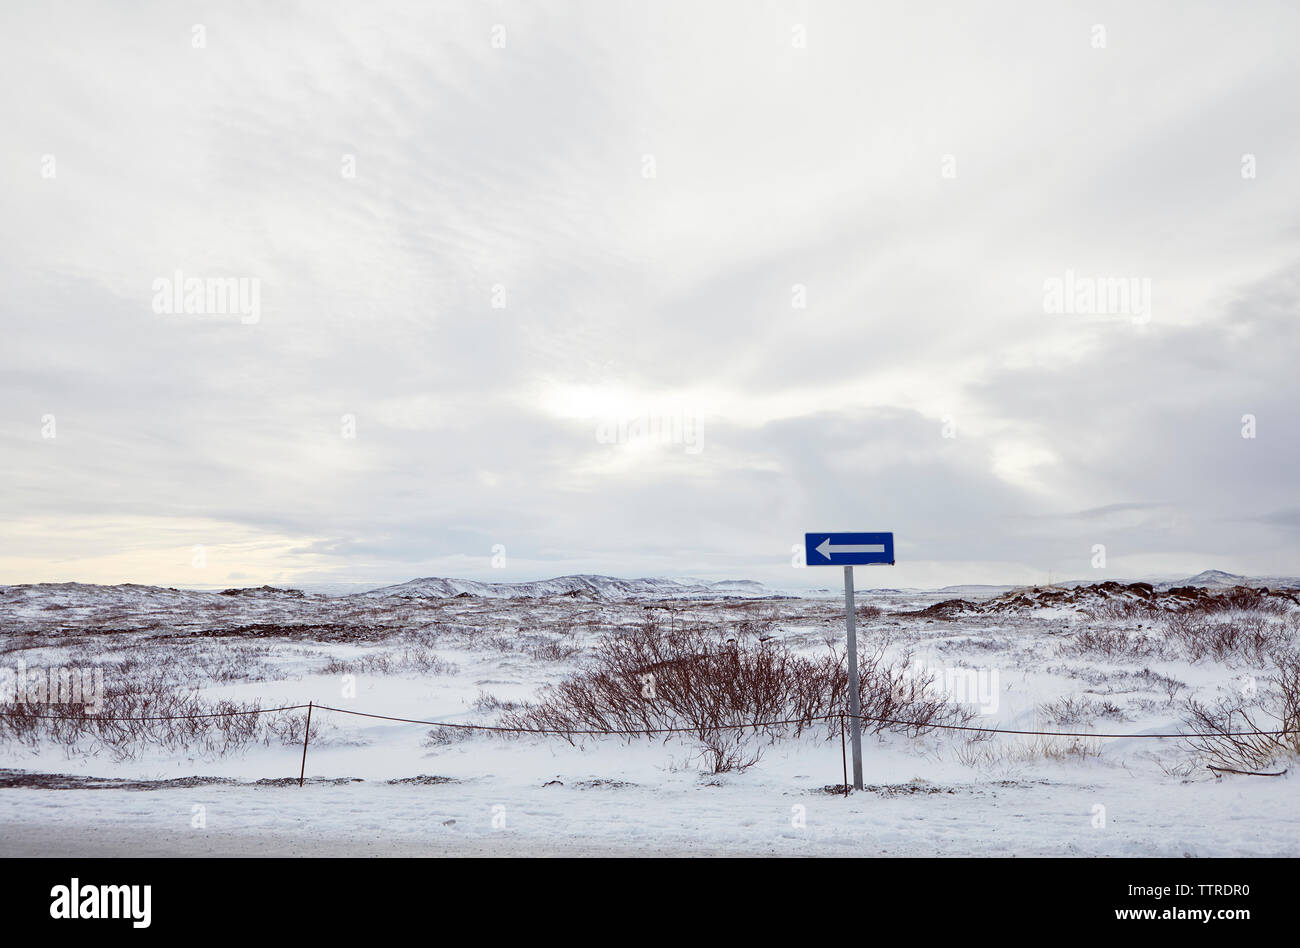 Arrow symbol on snow covered landscape against cloudy sky Stock Photo